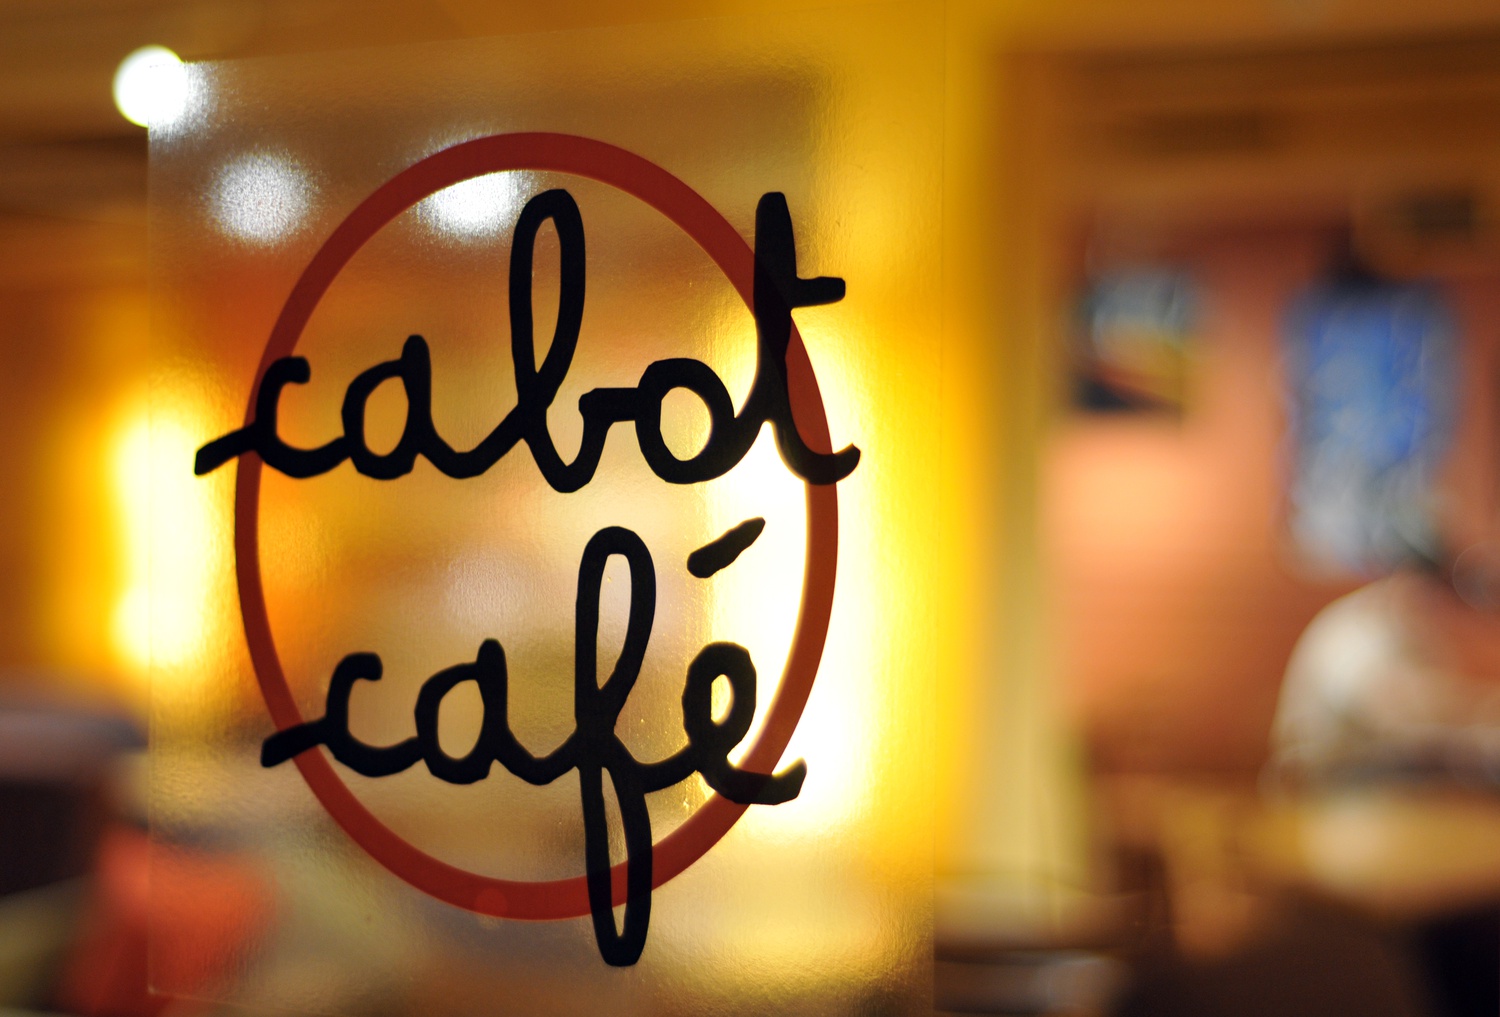 Cabot Cafe is a centerpiece of undergraduate life in the Radcliffe Quadrangle. Nestled in the basement of Cabot House, it is staffed and run by undergraduates and open until 1 a.m. Saturday through Thursday, making it a perfect late-night study or hangout spot.